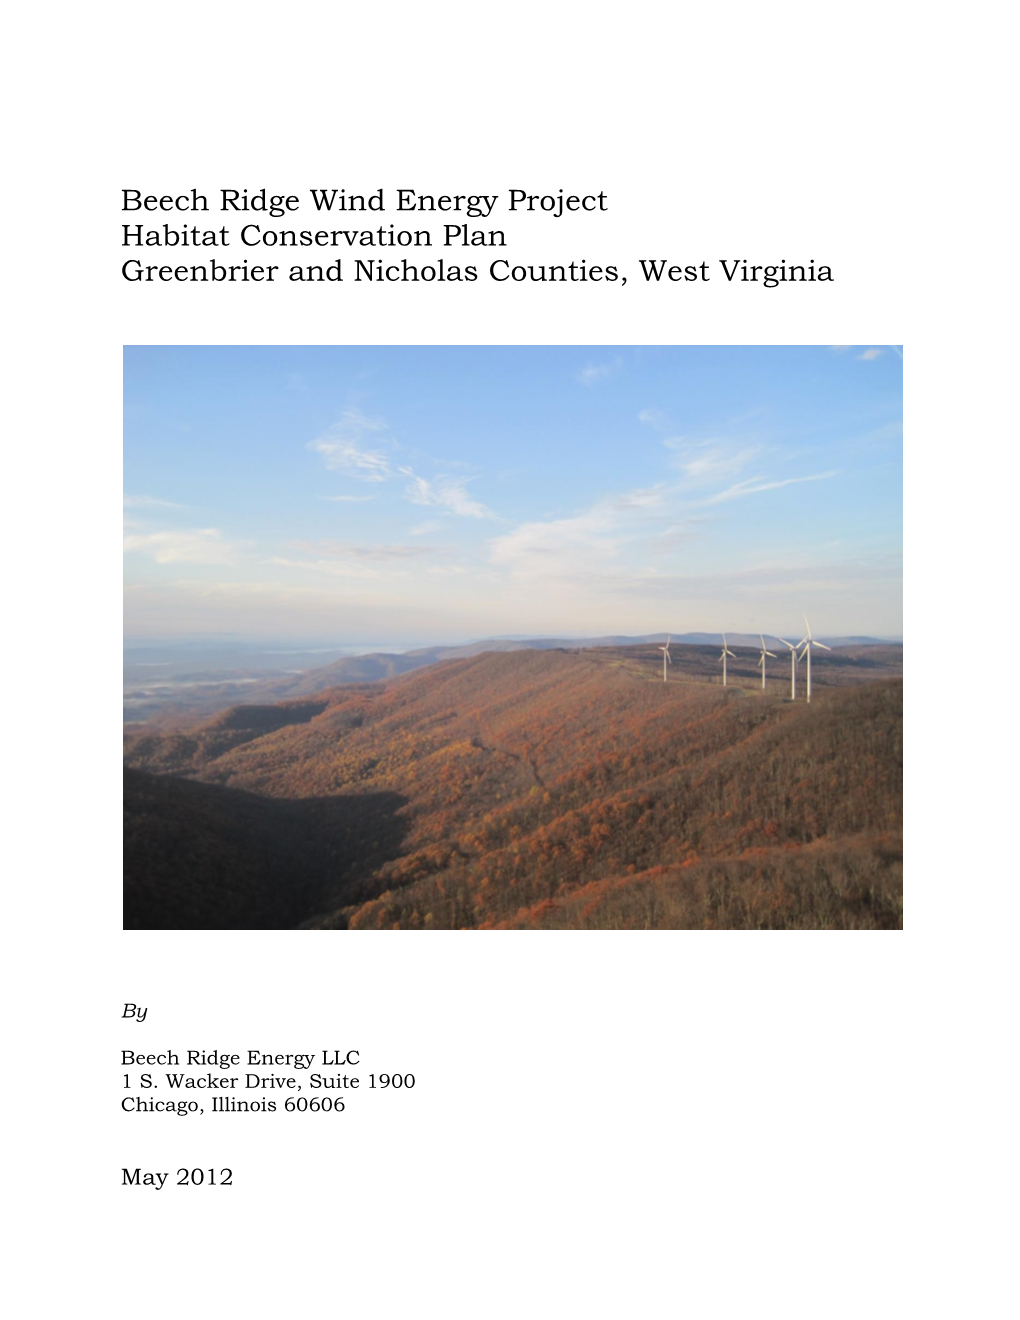 Beech Ridge Wind Energy Project Habitat Conservation Plan Greenbrier and Nicholas Counties, West Virginia